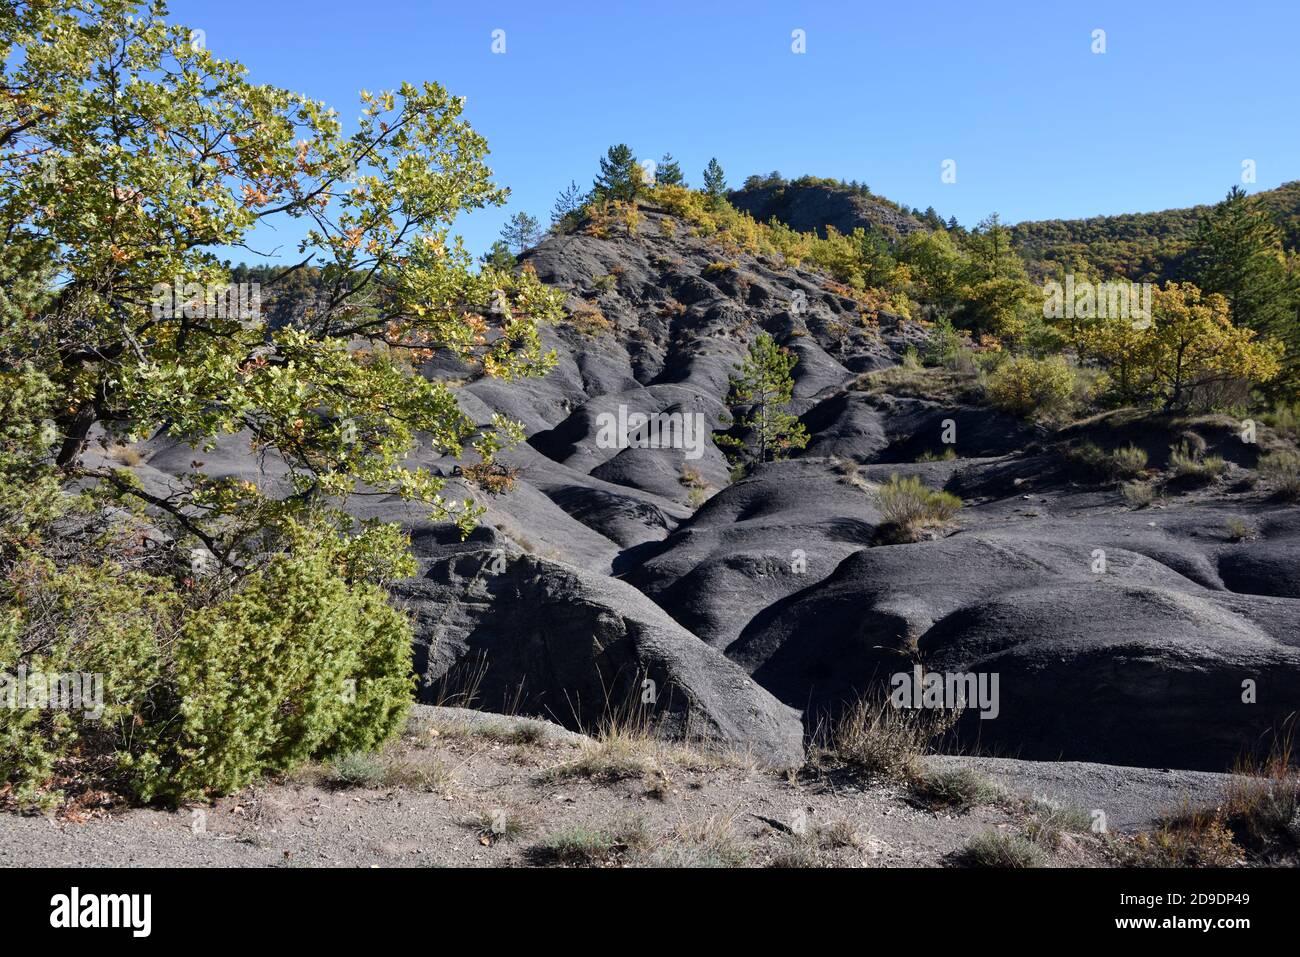 Black Marl, Marlstone or Black Shale Formations known as Robines in the Haute Provence Geopark near Digne-les-Bains Alpes-de-Haute-Provence  France Stock Photo